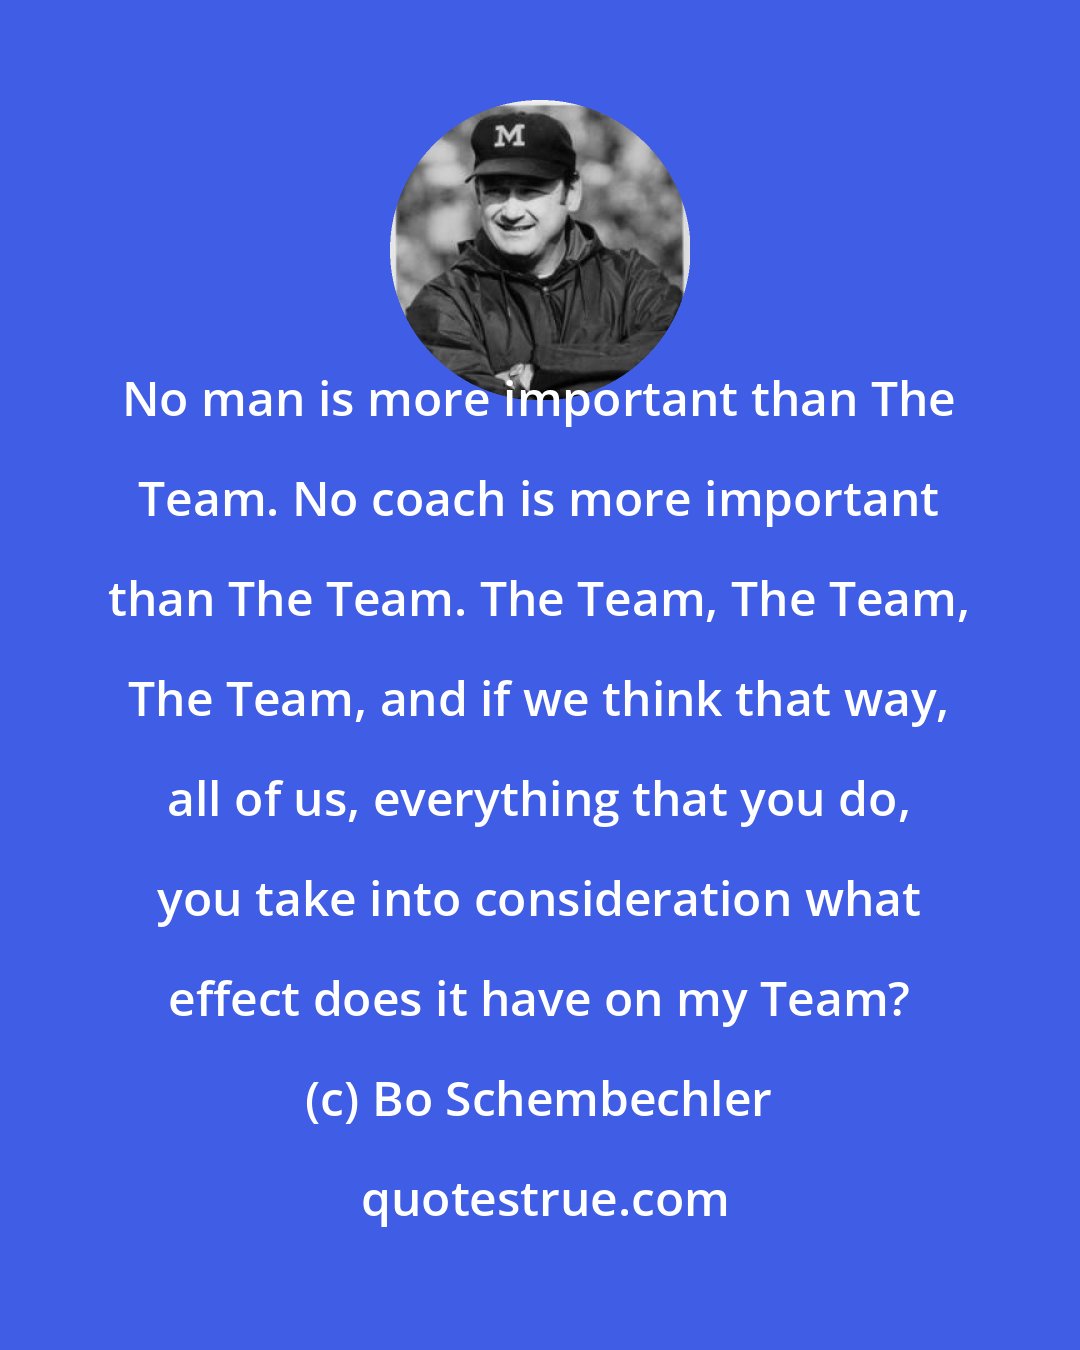 Bo Schembechler: No man is more important than The Team. No coach is more important than The Team. The Team, The Team, The Team, and if we think that way, all of us, everything that you do, you take into consideration what effect does it have on my Team?